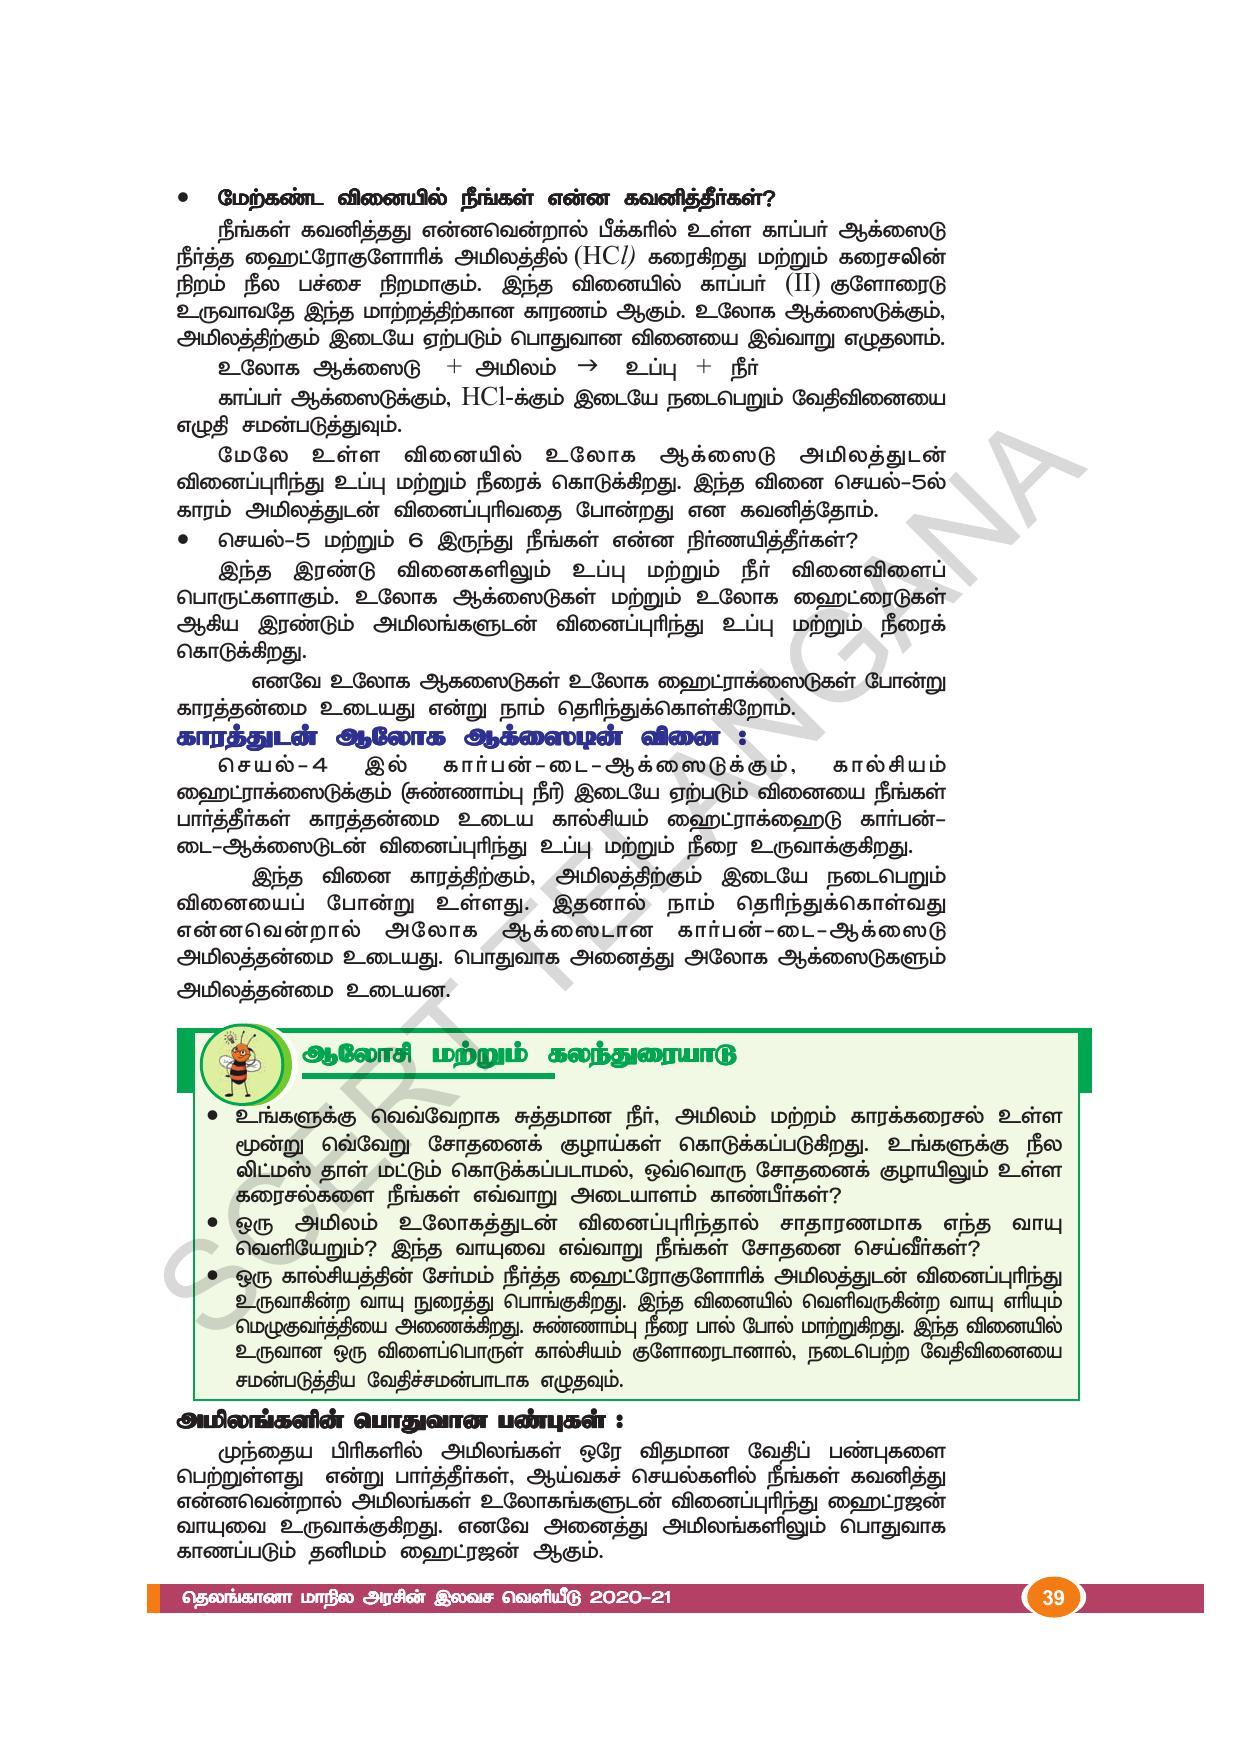 TS SCERT Class 10 Physical Science(Tamil Medium) Text Book - Page 51